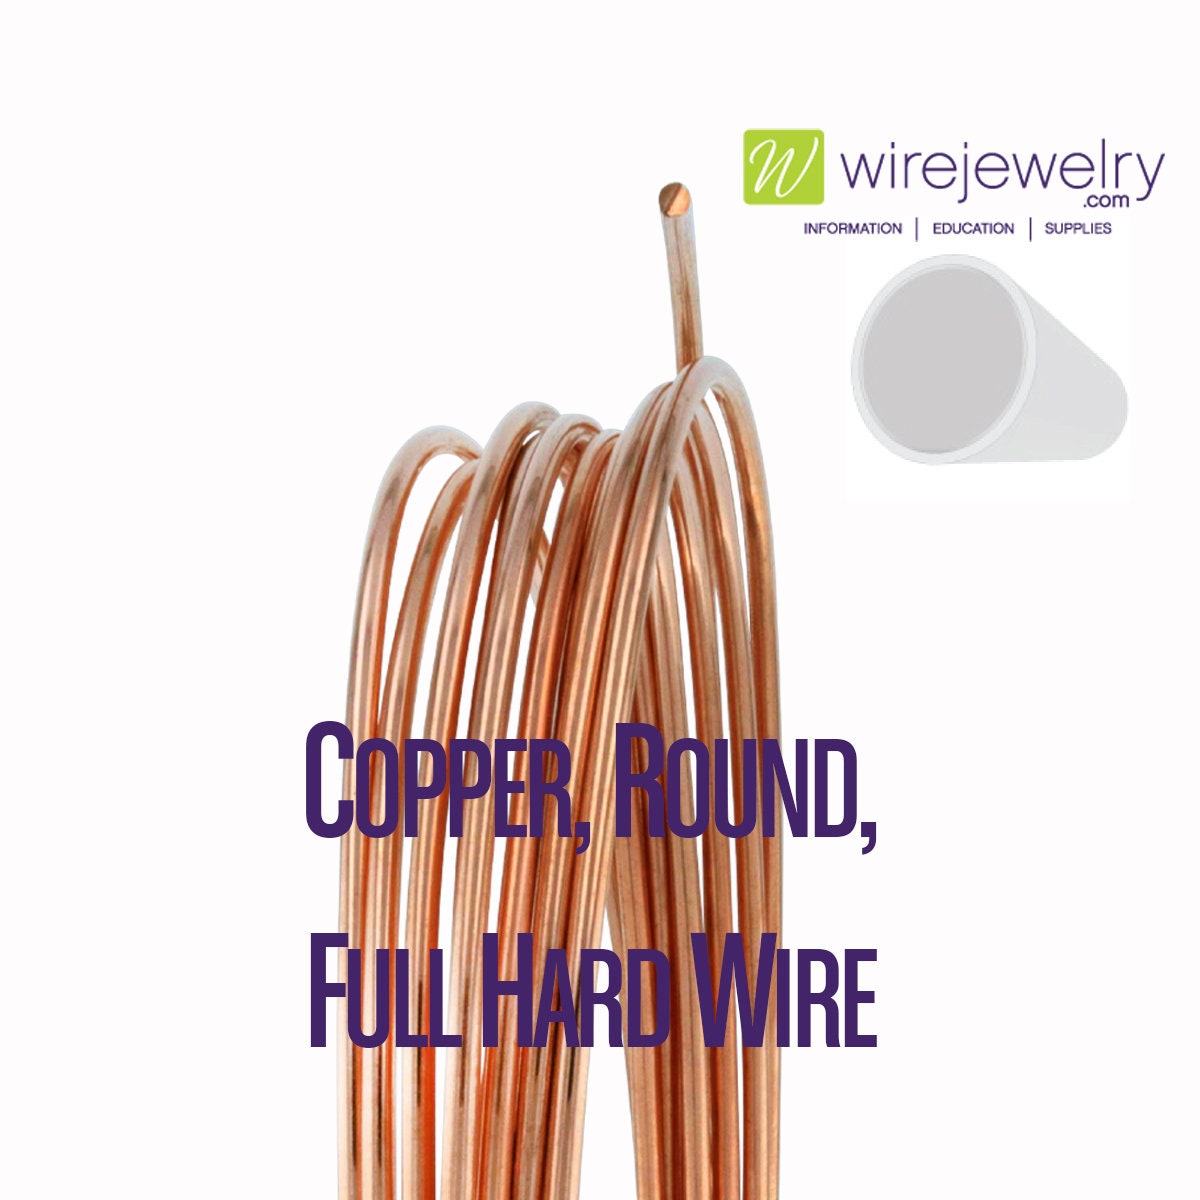 24 Gauge Soft Copper Wire, Round Wire for Jewelry Making, 0.55mm